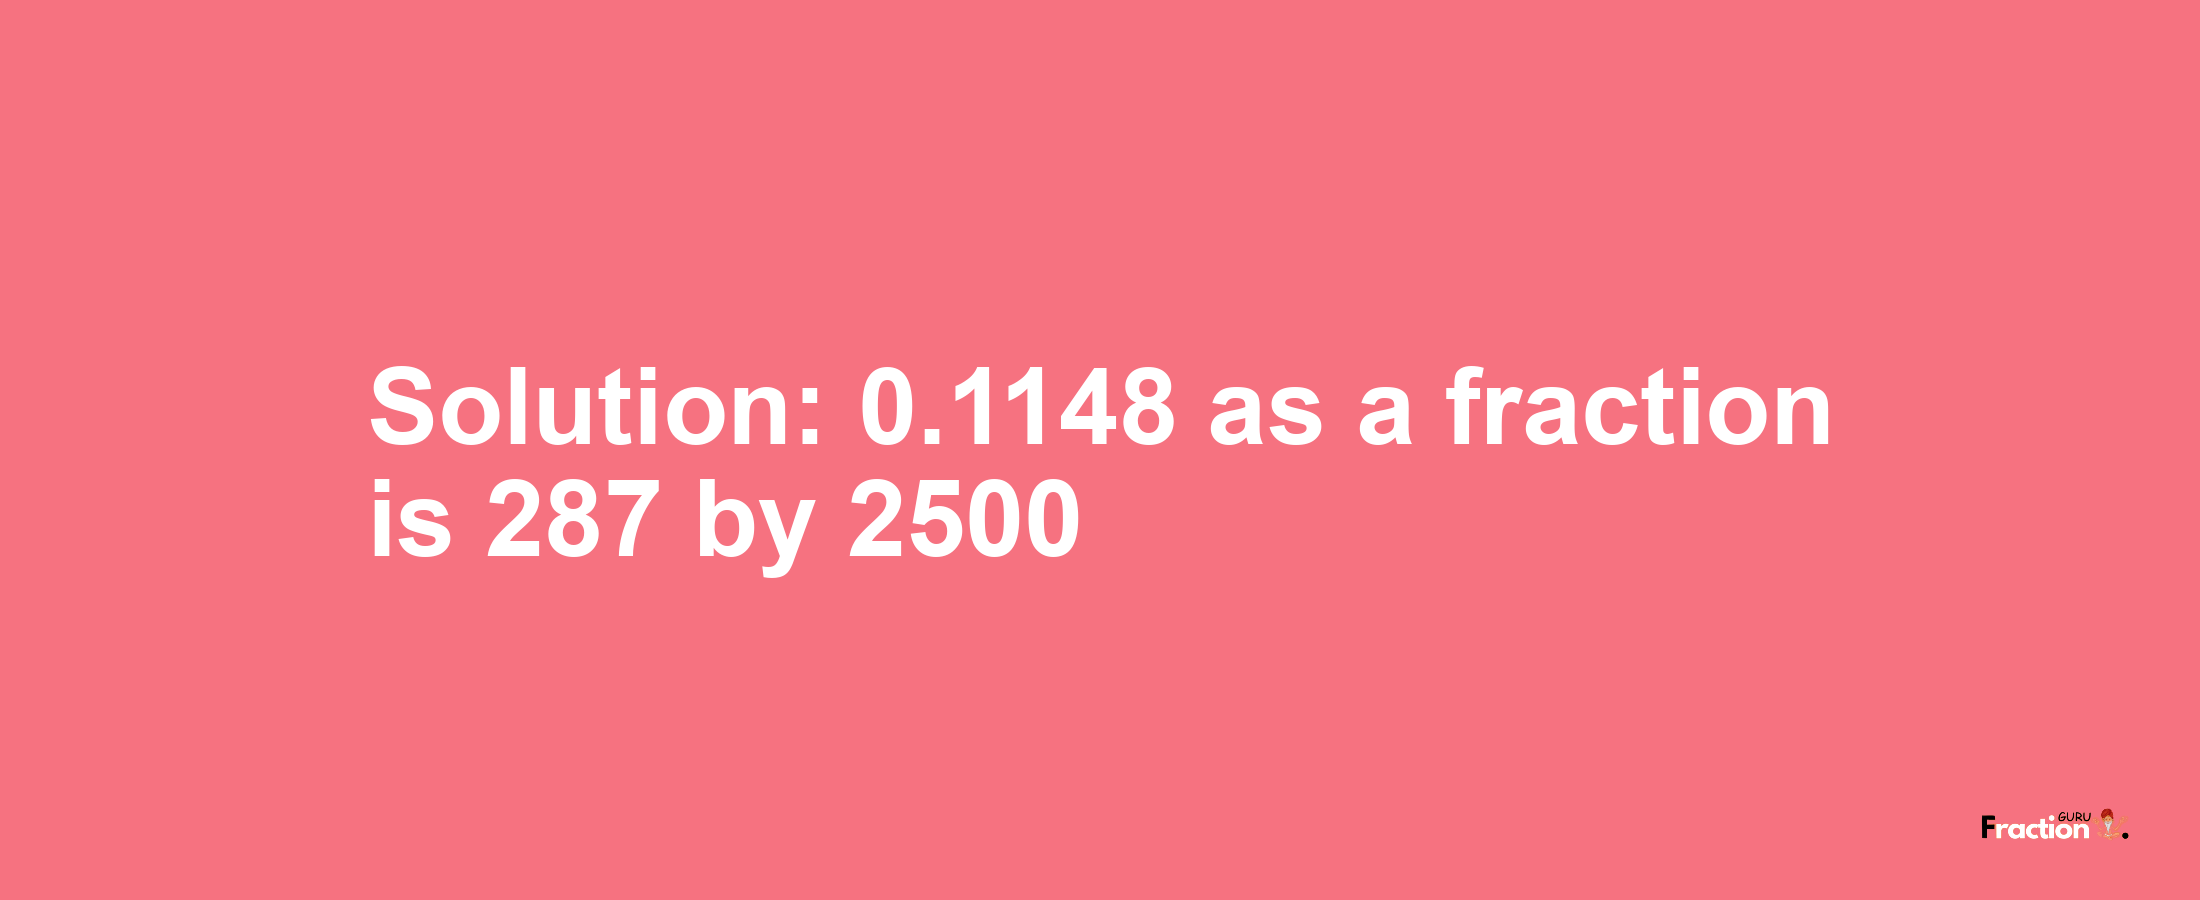 Solution:0.1148 as a fraction is 287/2500